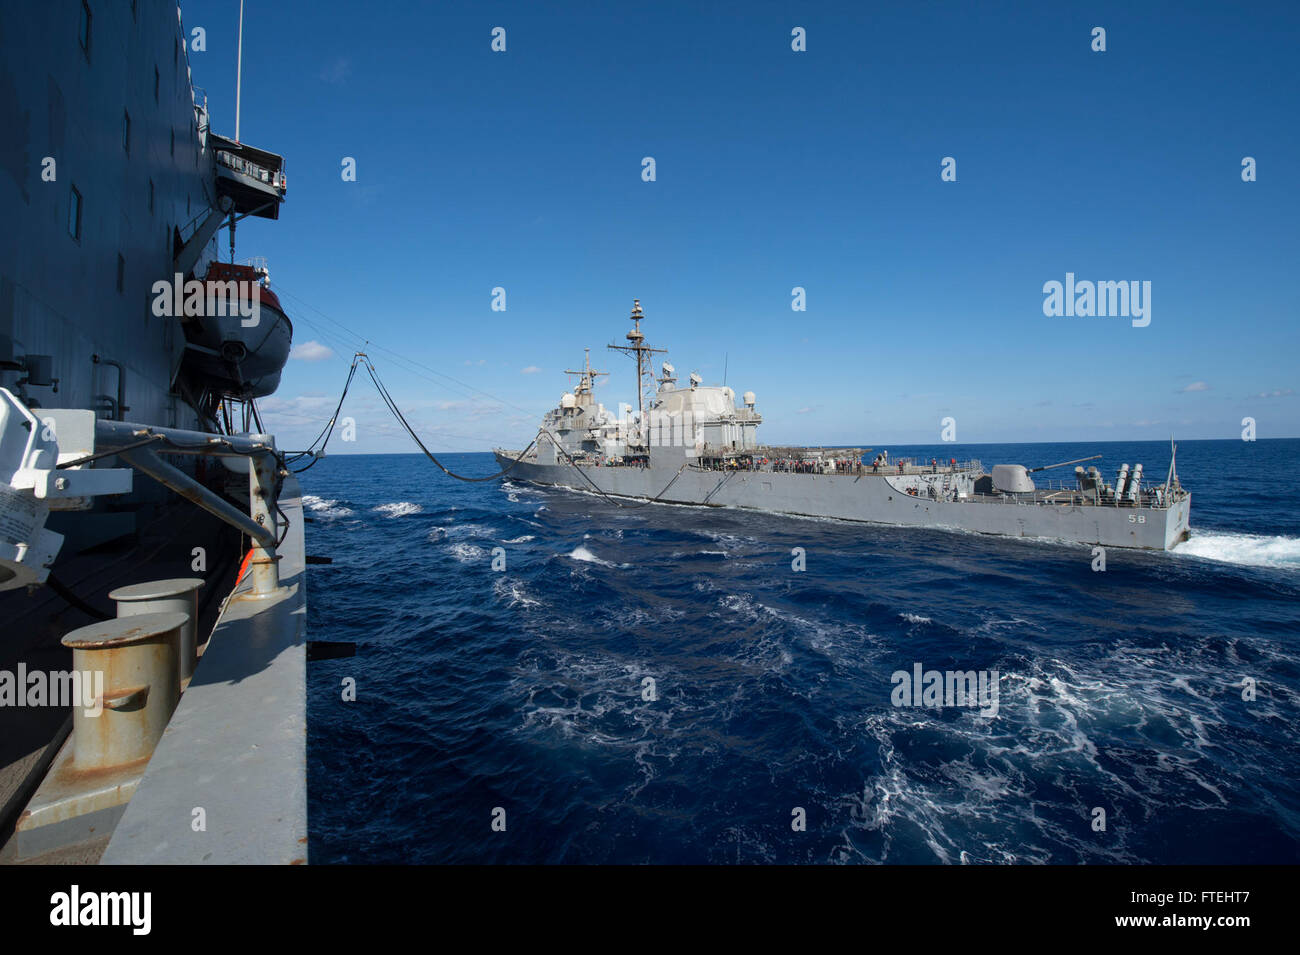 MEDITERRANEAN SEA (Oct. 28, 2014) – The Ticonderoga-class guided missile cruiser Philippine Sea (CG 58) receives fuel from the fleet replenishment oiler USNS Leroy Grumman (T-AO 195) during an underway replenishment-at-sea. Grumman, the Military Sealift Command Mediterranean Sea duty oiler, is forward-deployed to the U.S. 6th Fleet area of operations in support of national security interests in Europe and Africa. Stock Photo